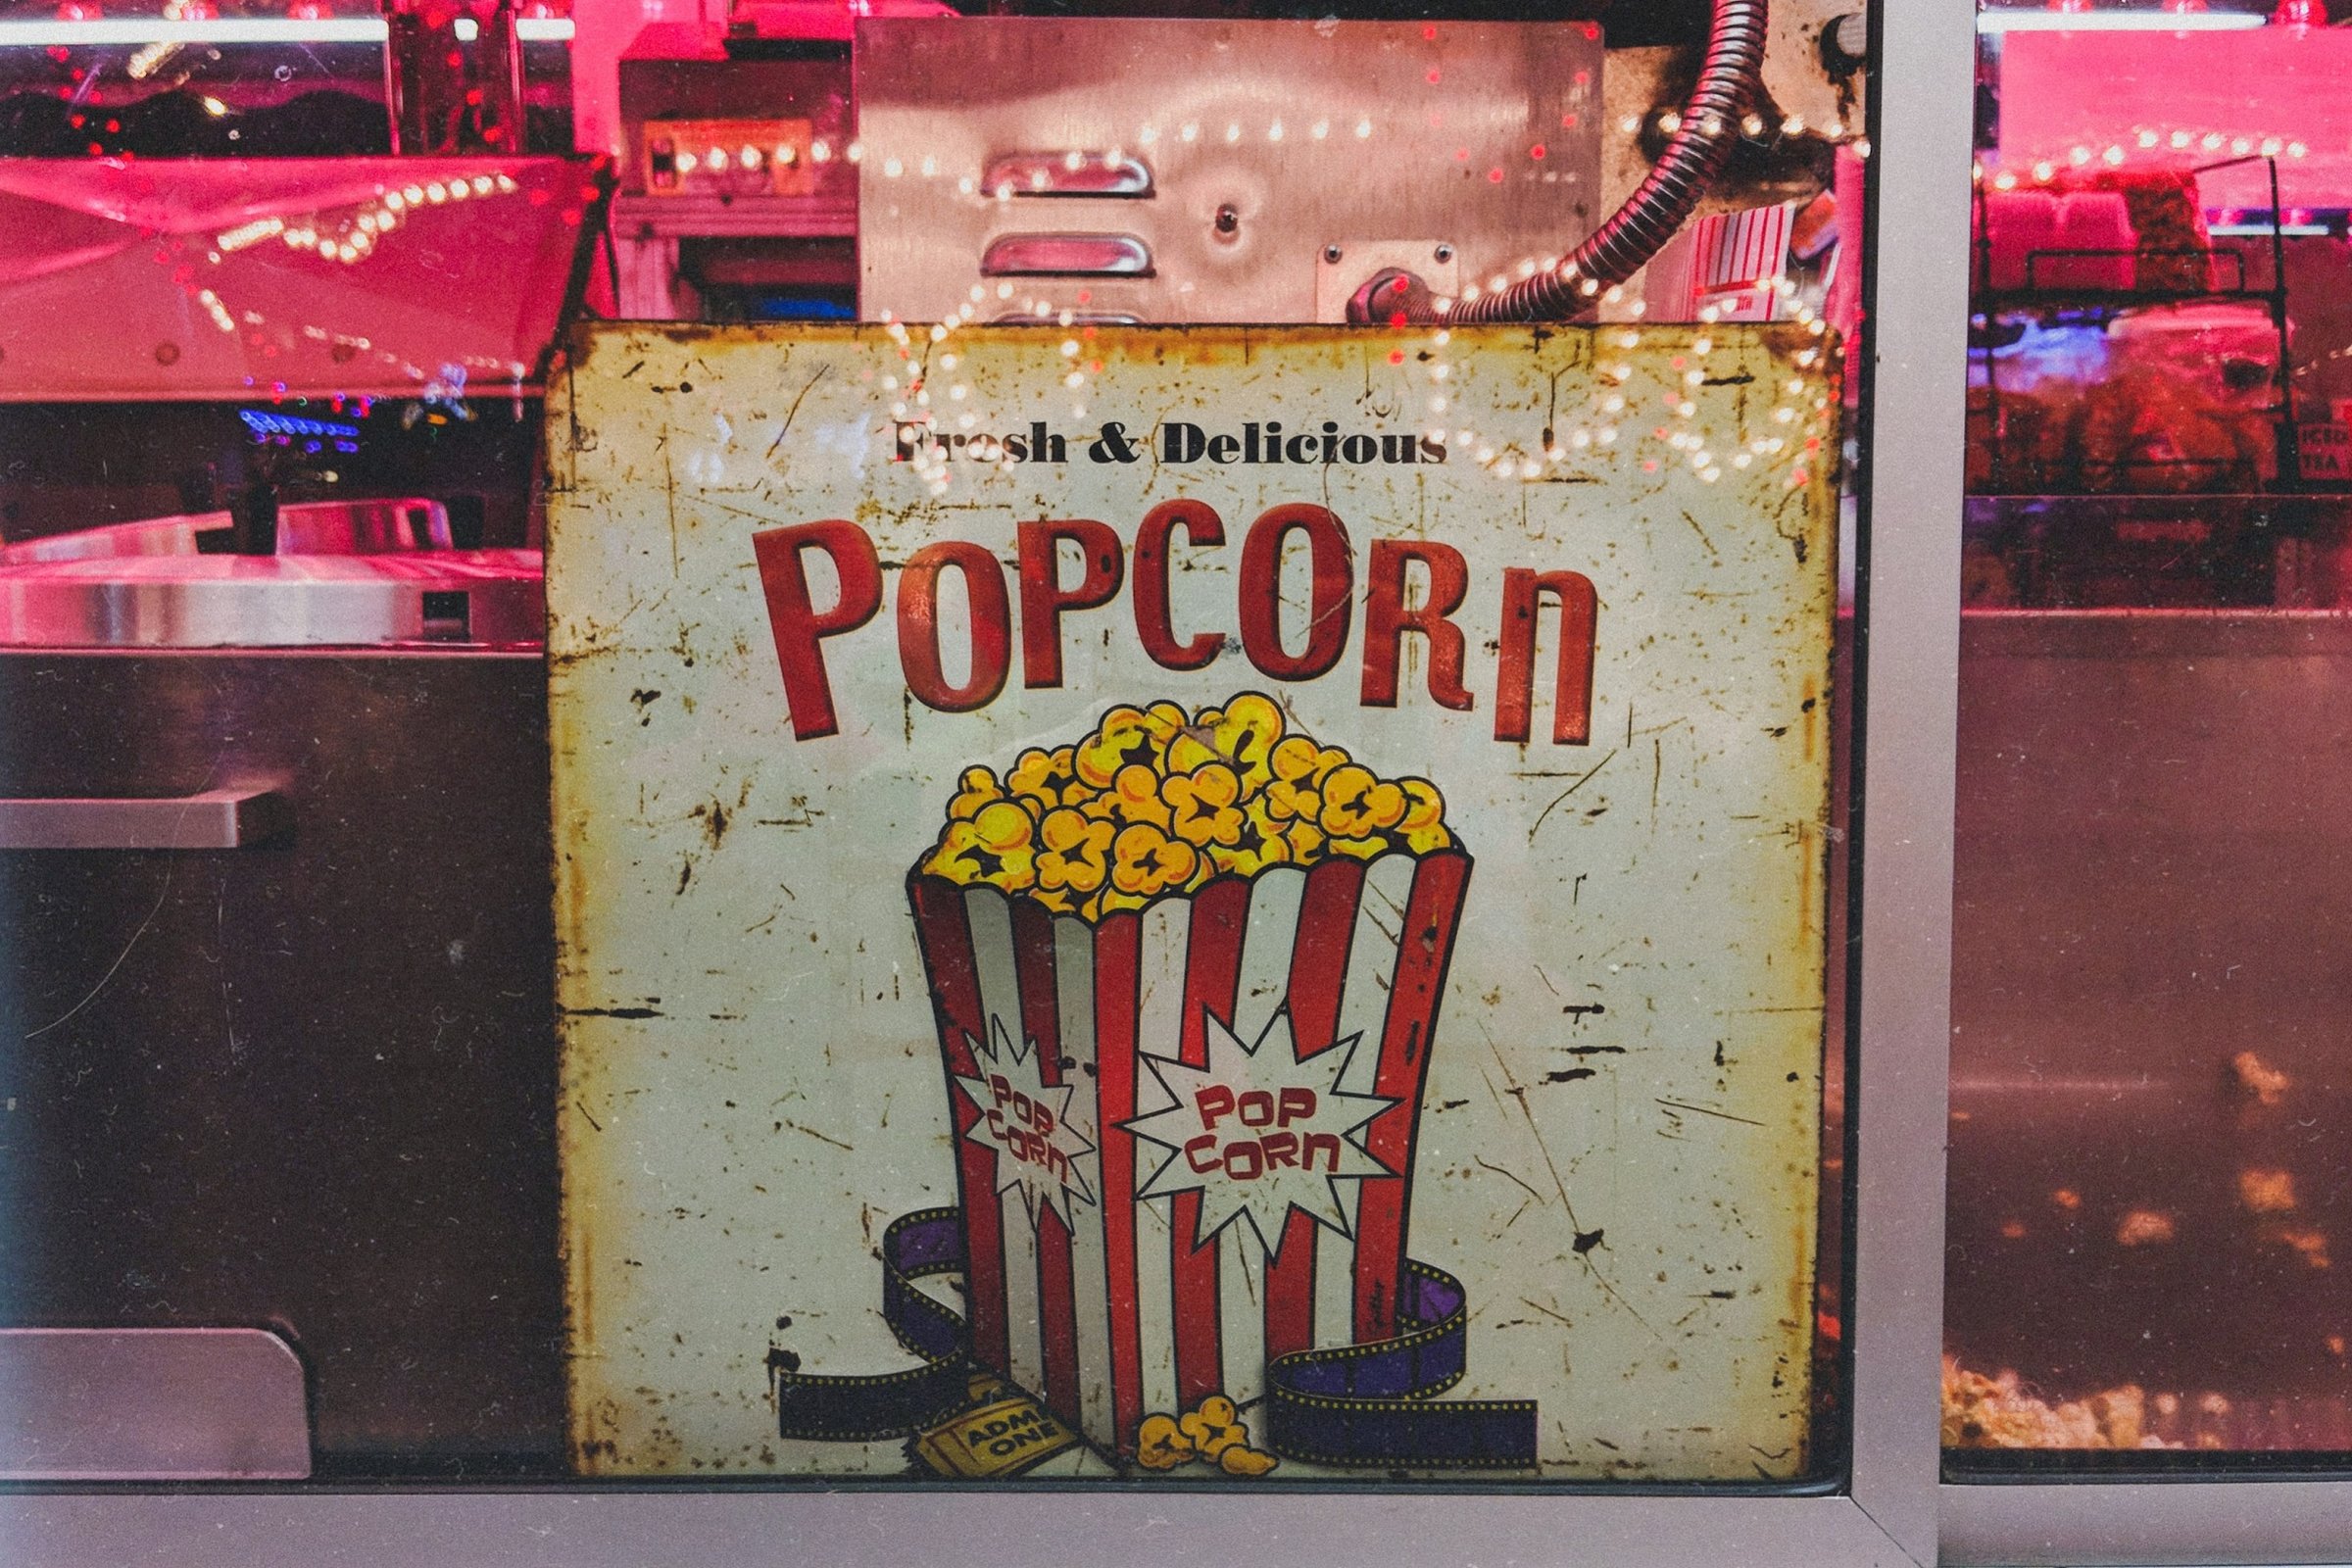 The parable of the popcorn machine